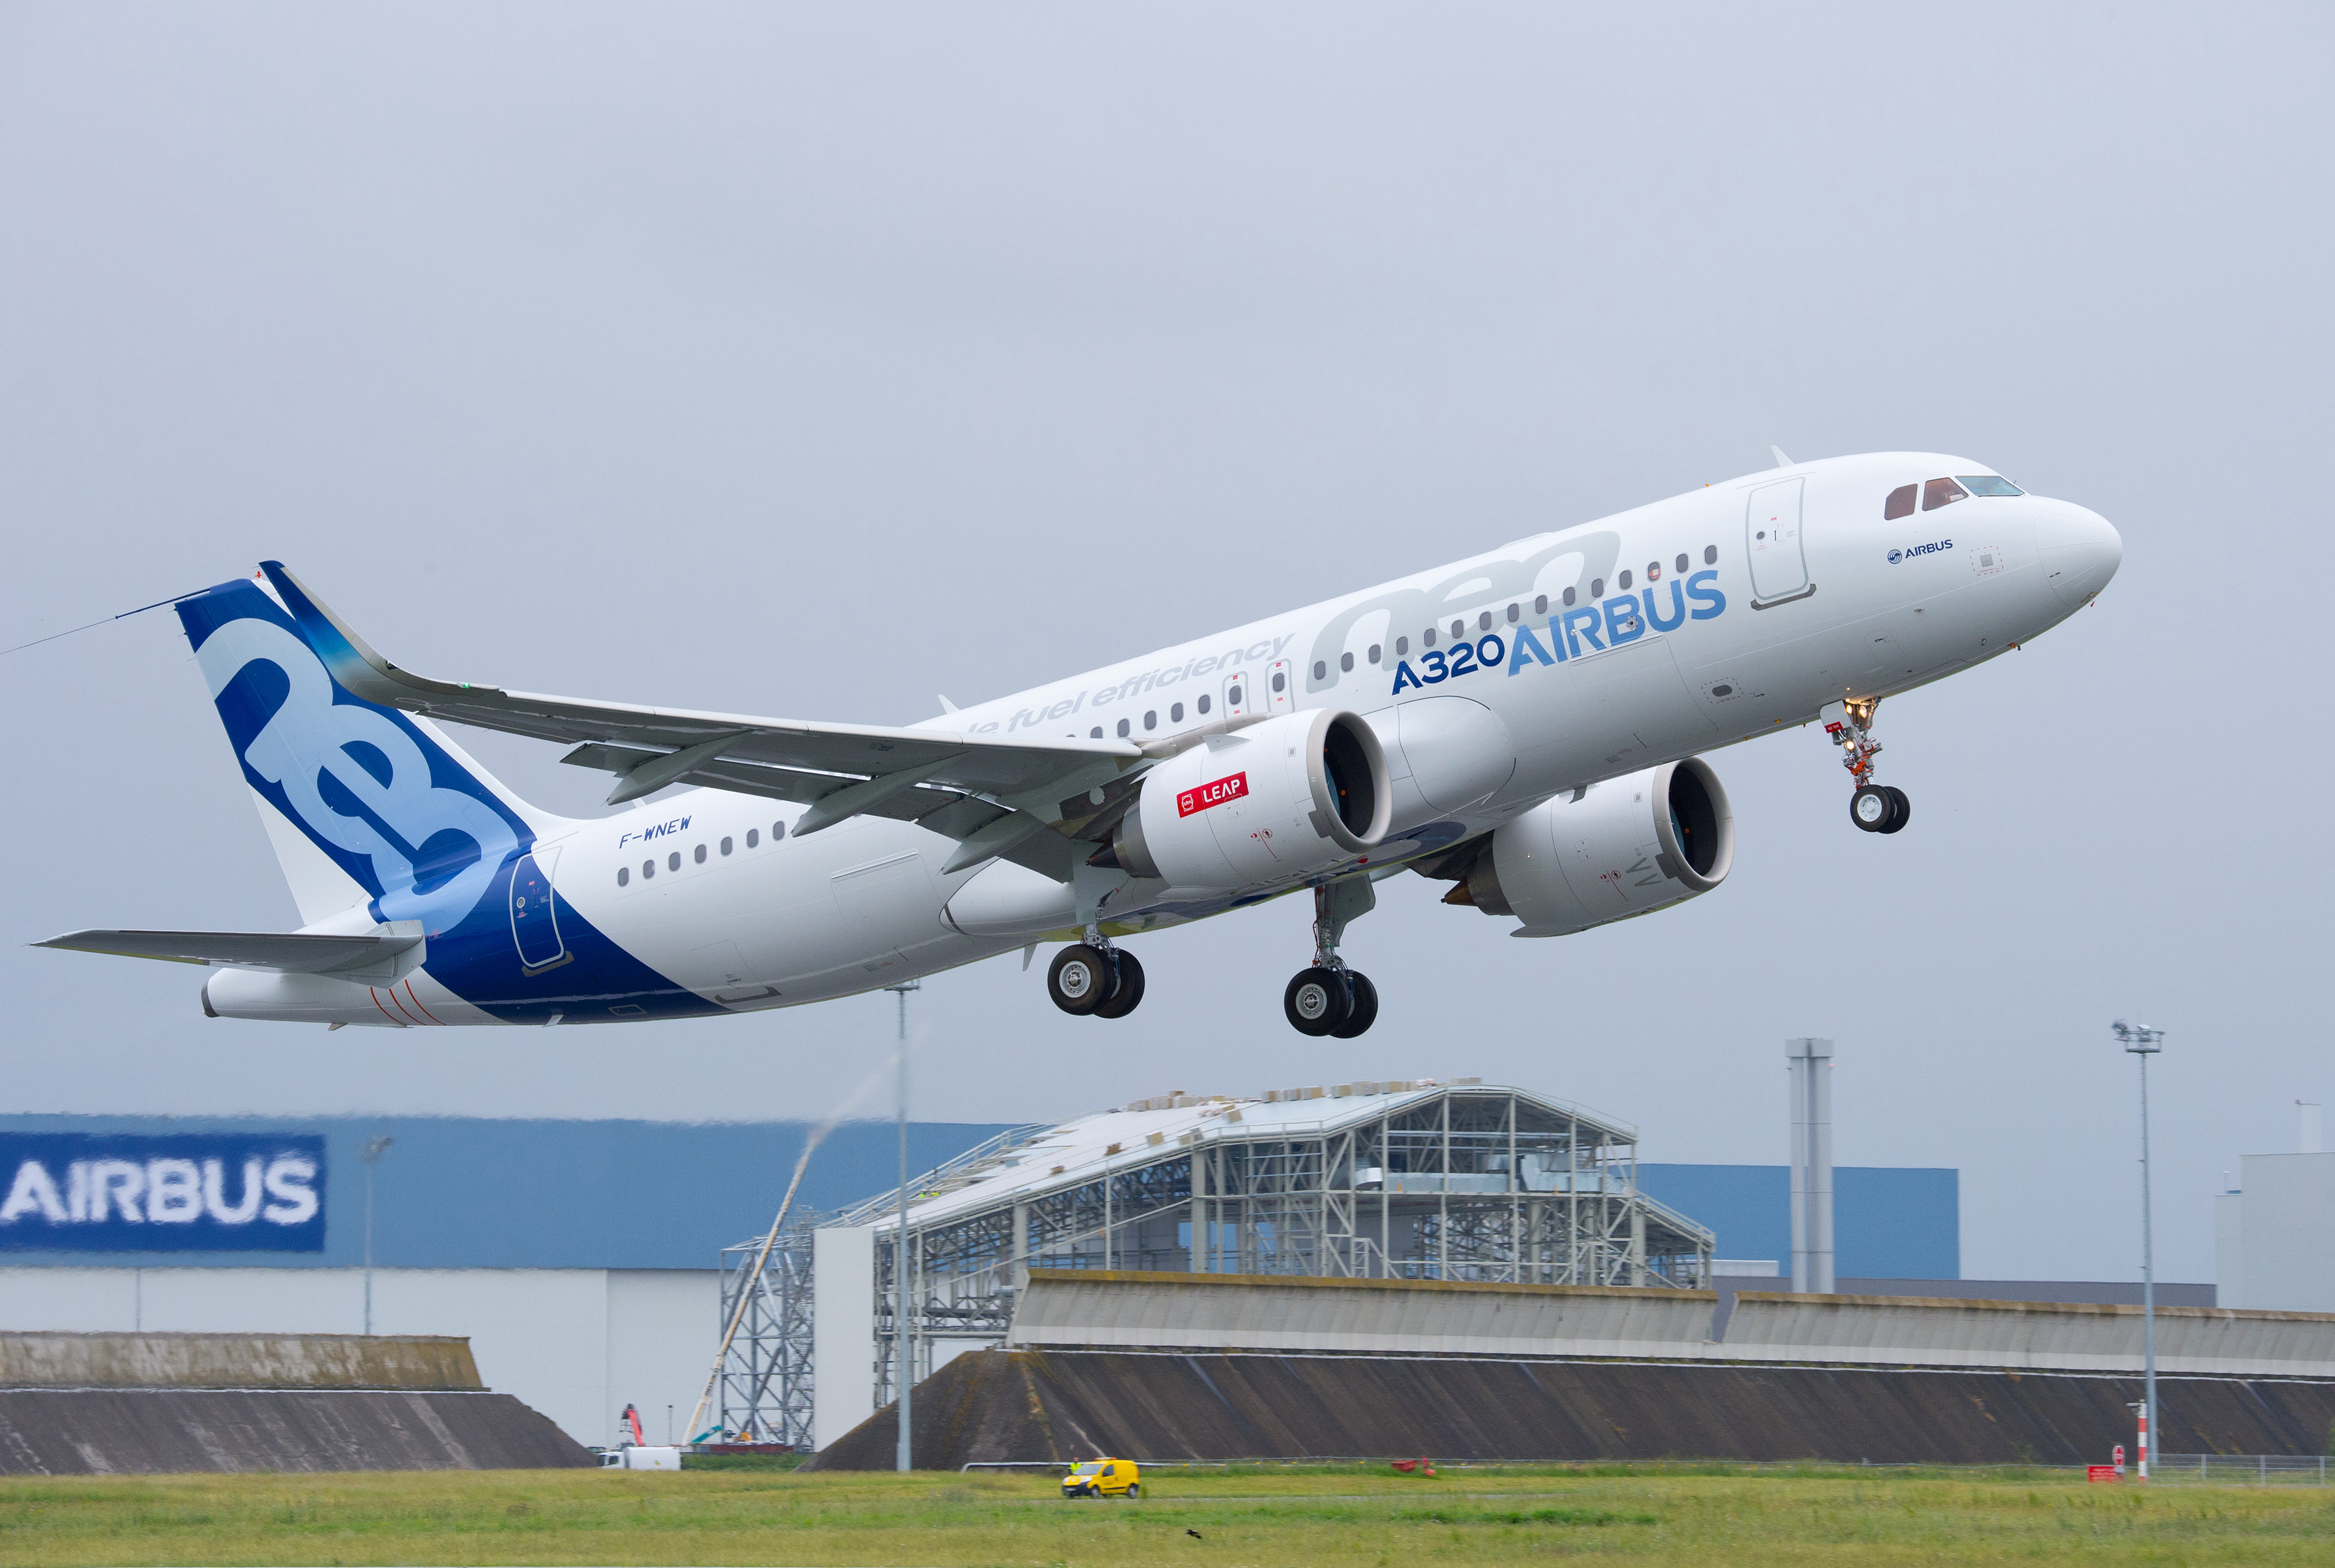 AirbusA320neo taking off from runway in Toulouse